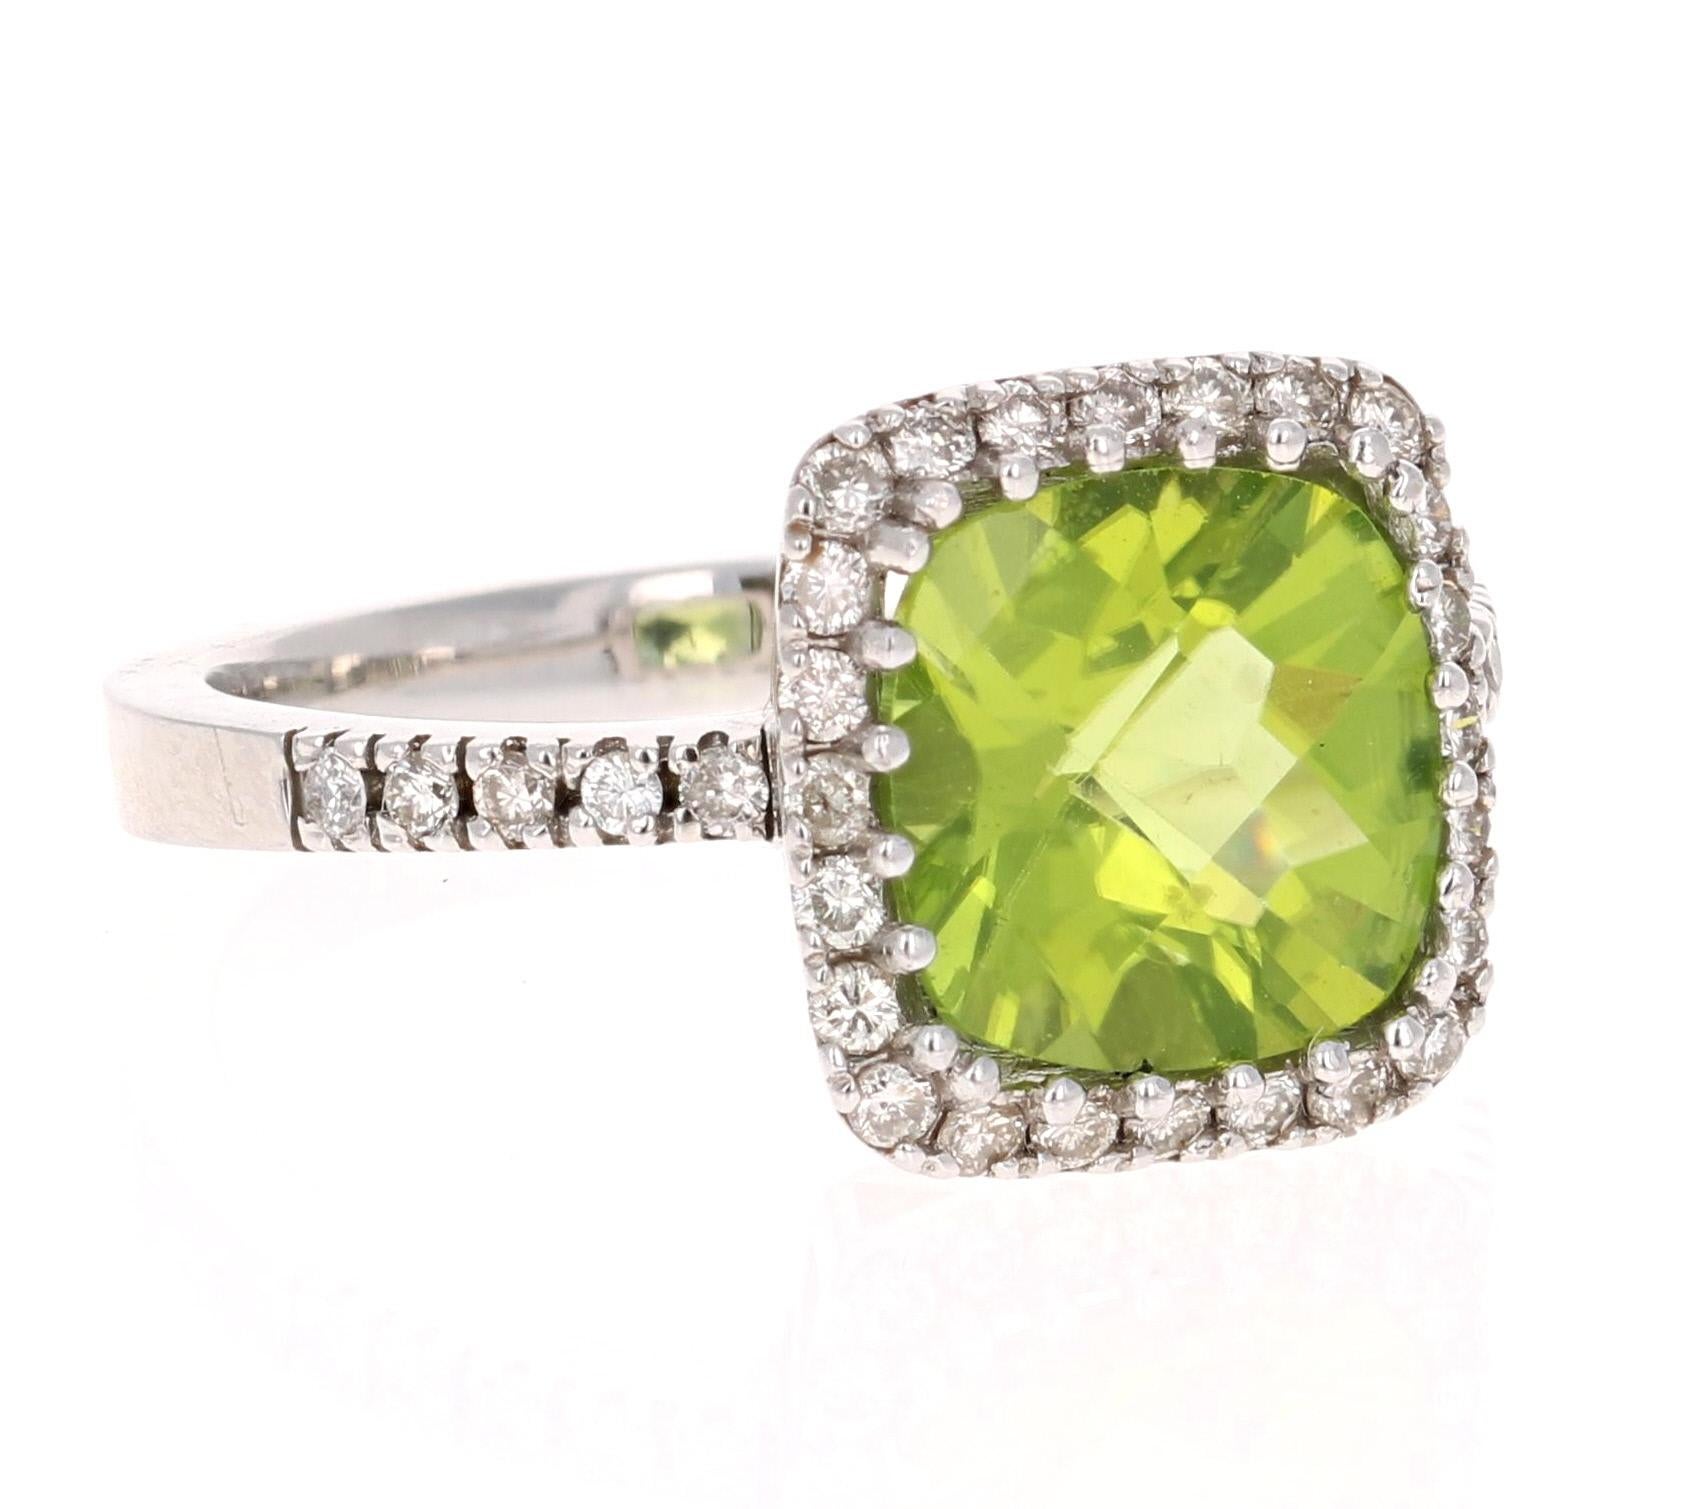 3.38 Carat Peridot Diamond Engagement White Gold Ring - this can be a stunning and unique alternative to an engagement ring!

This beautiful ring has a Cushion Cut Peridot in the center that weighs 2.97 carats. The ring is surrounded by a gorgeous